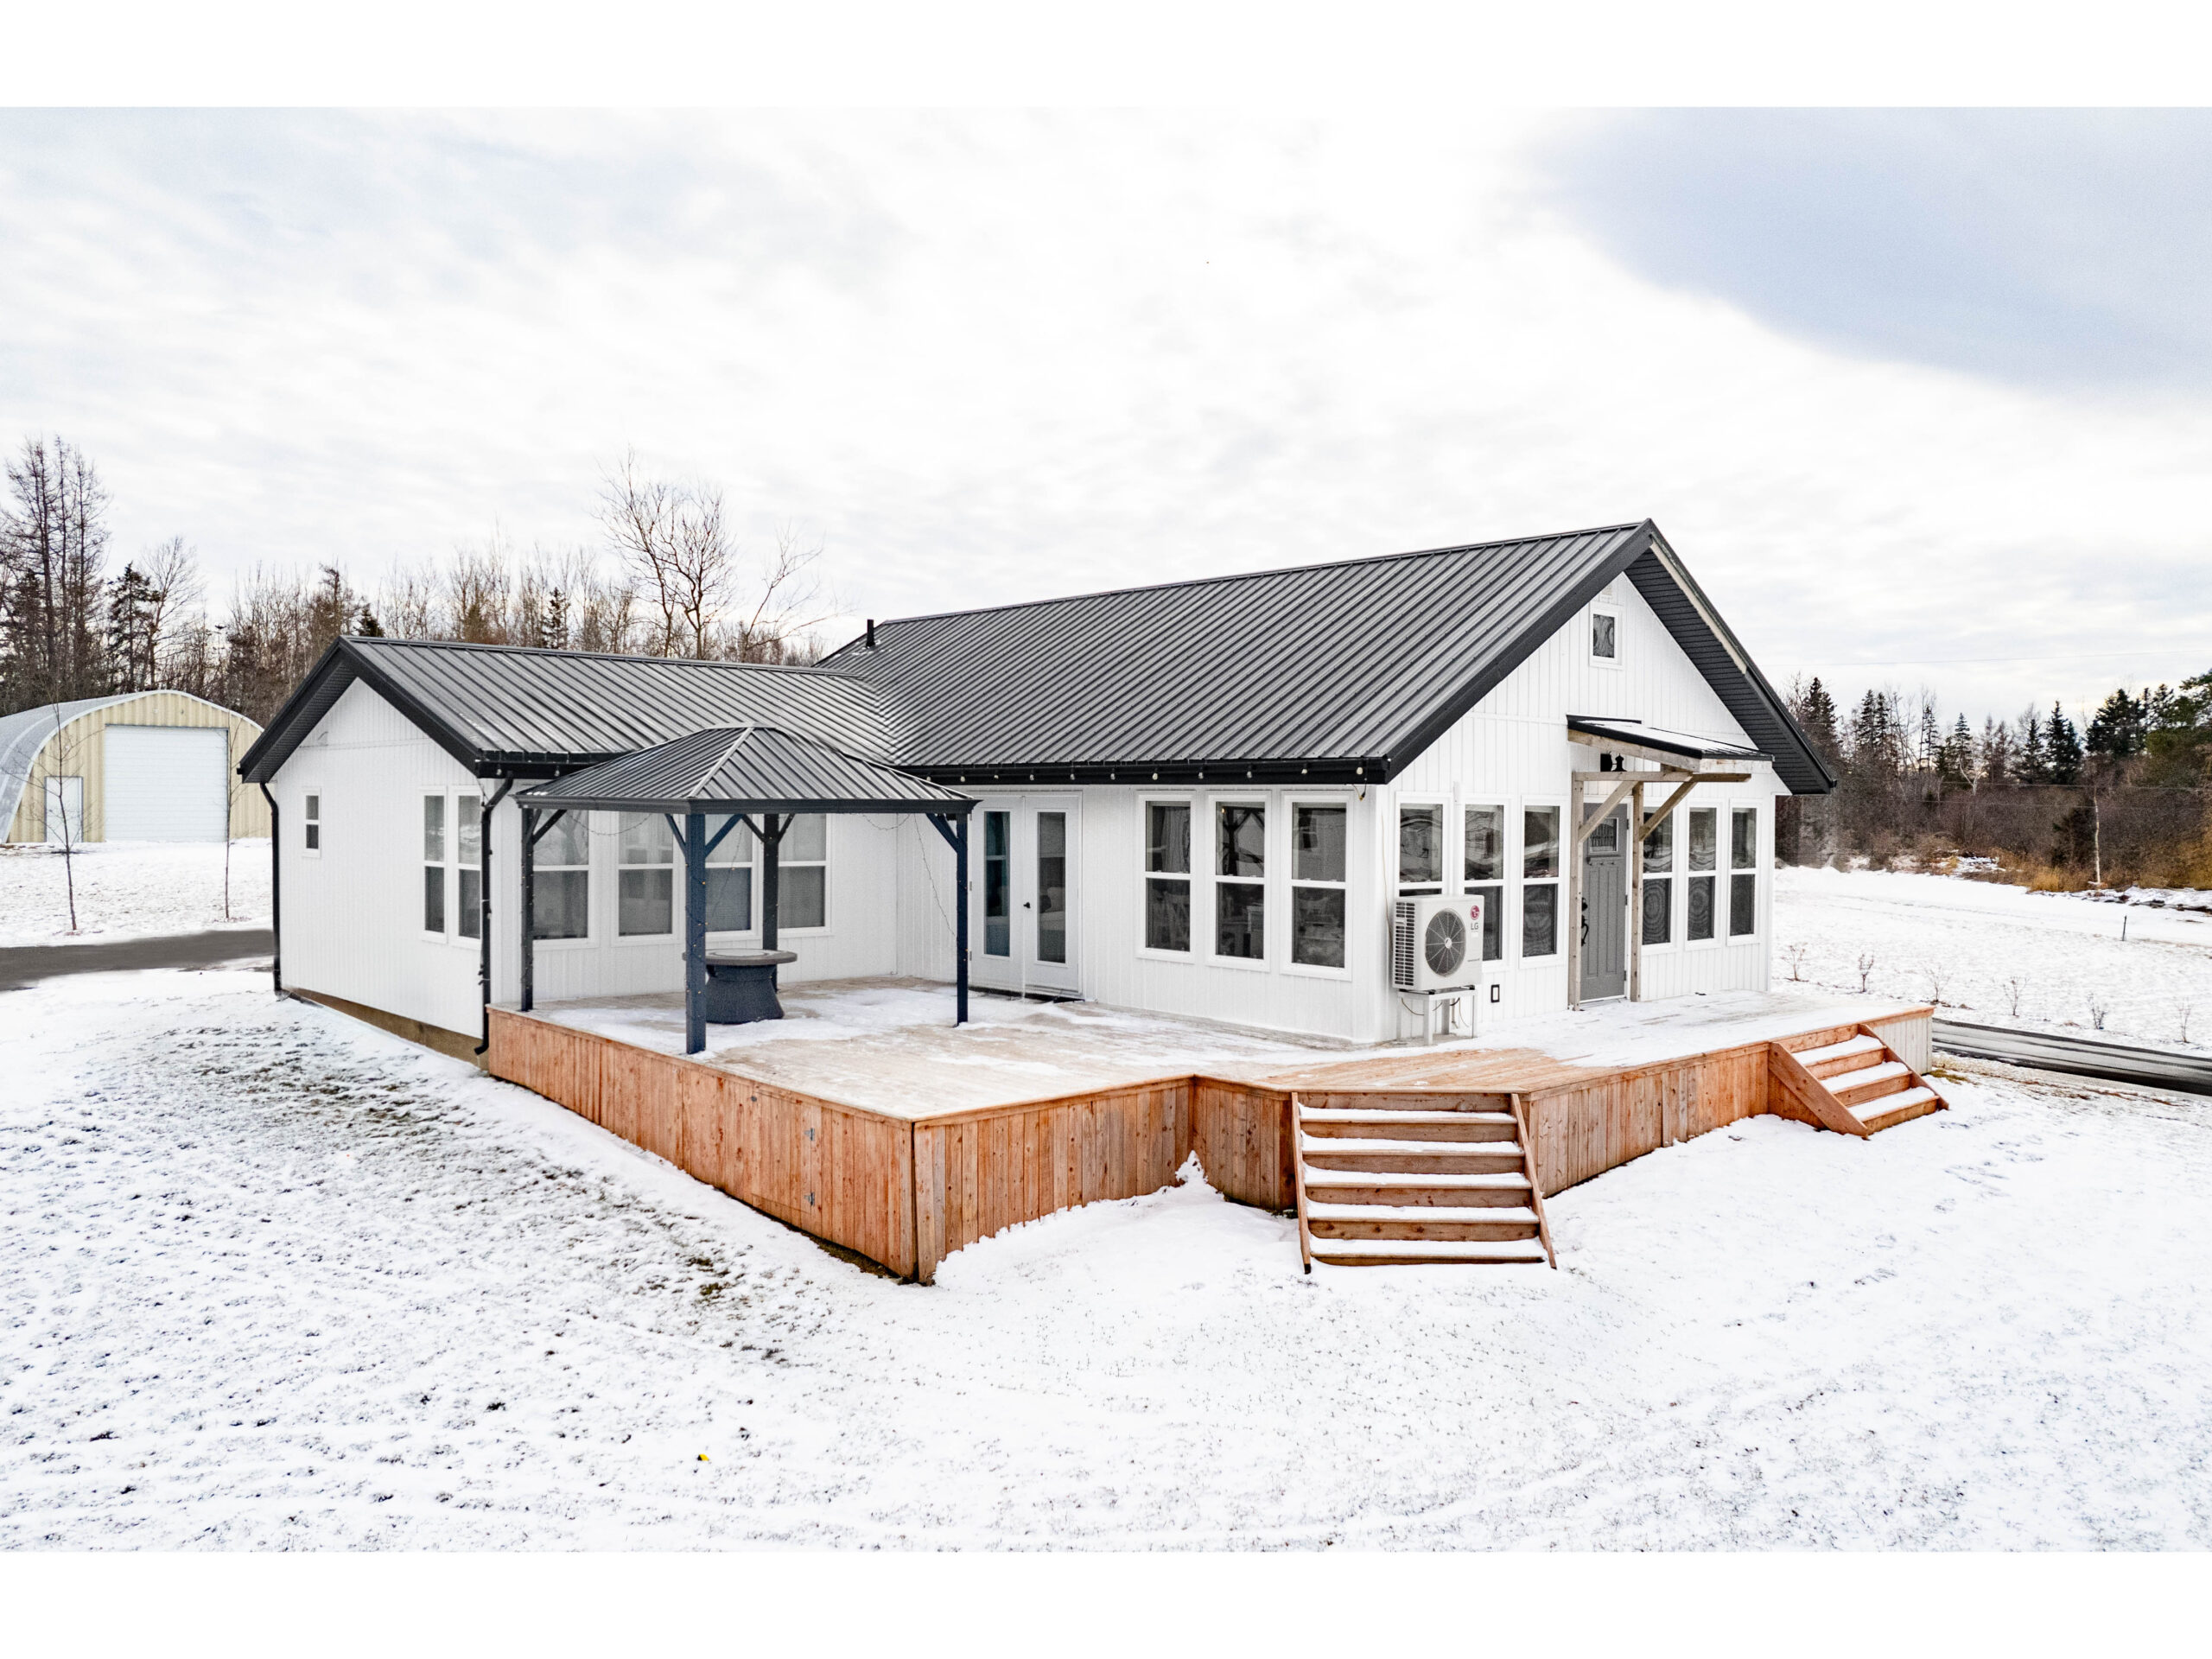 A small home with a white exterior, black trim, a big wooden deck, and lots of windows, sitting on a snow-covered lot.